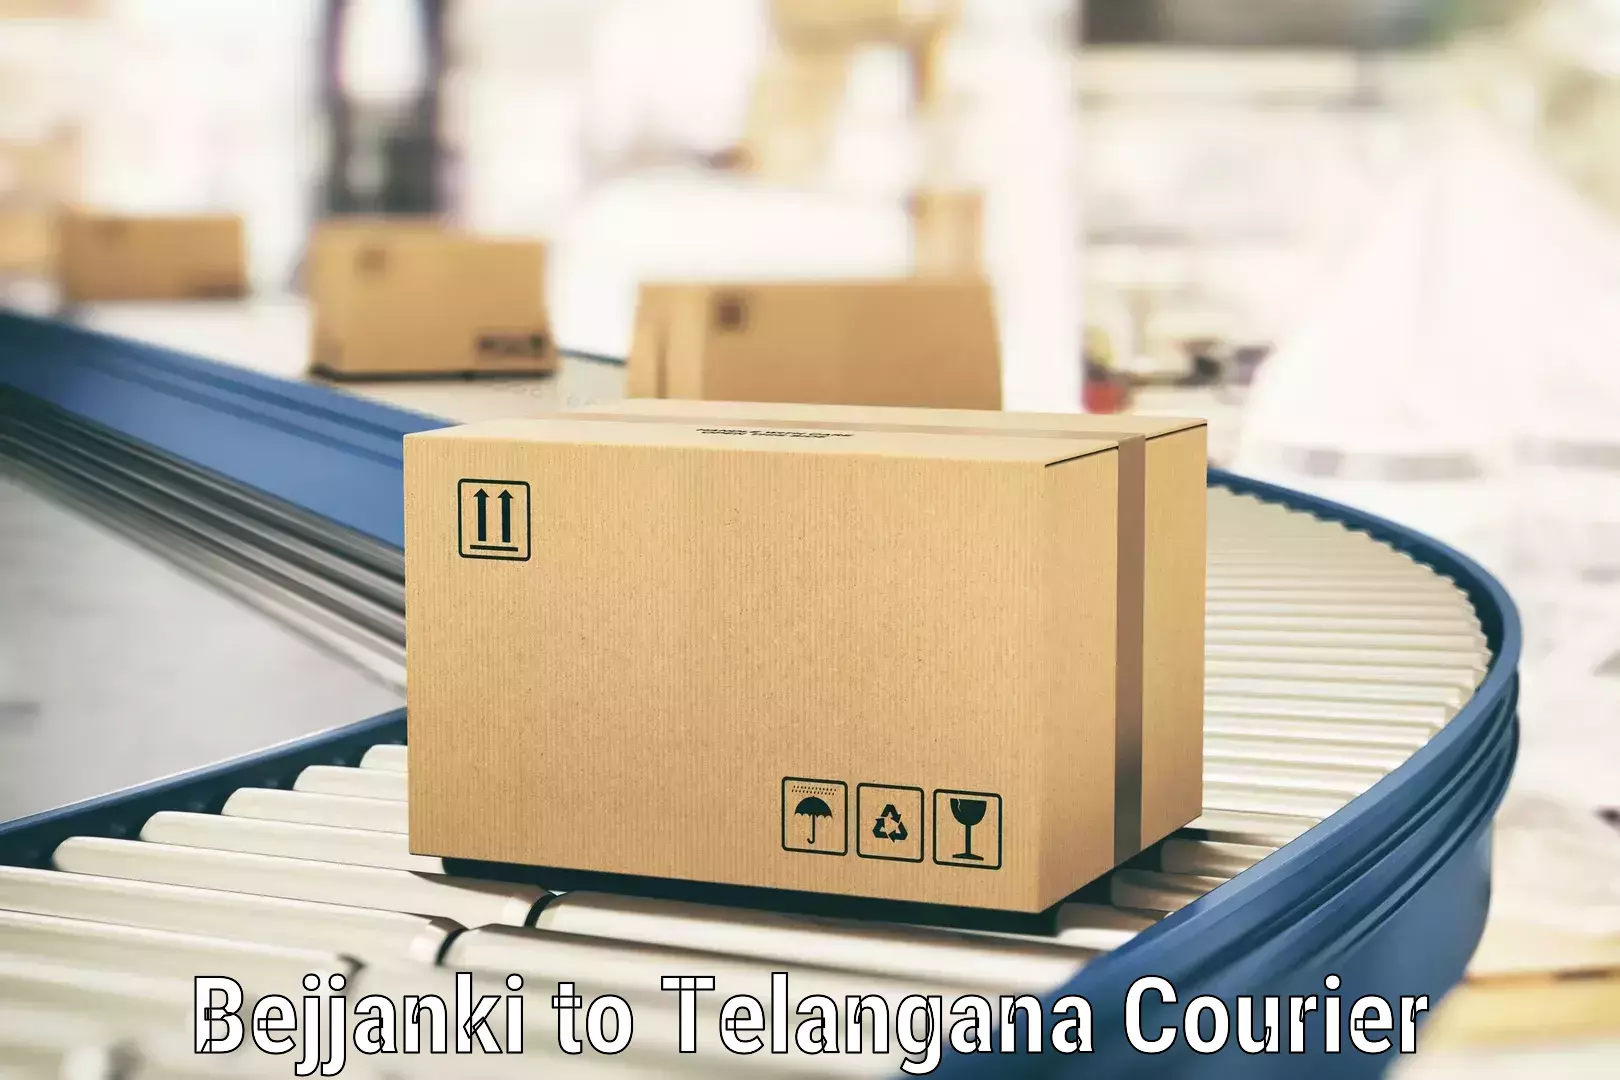 Parcel service for businesses Bejjanki to Metpally